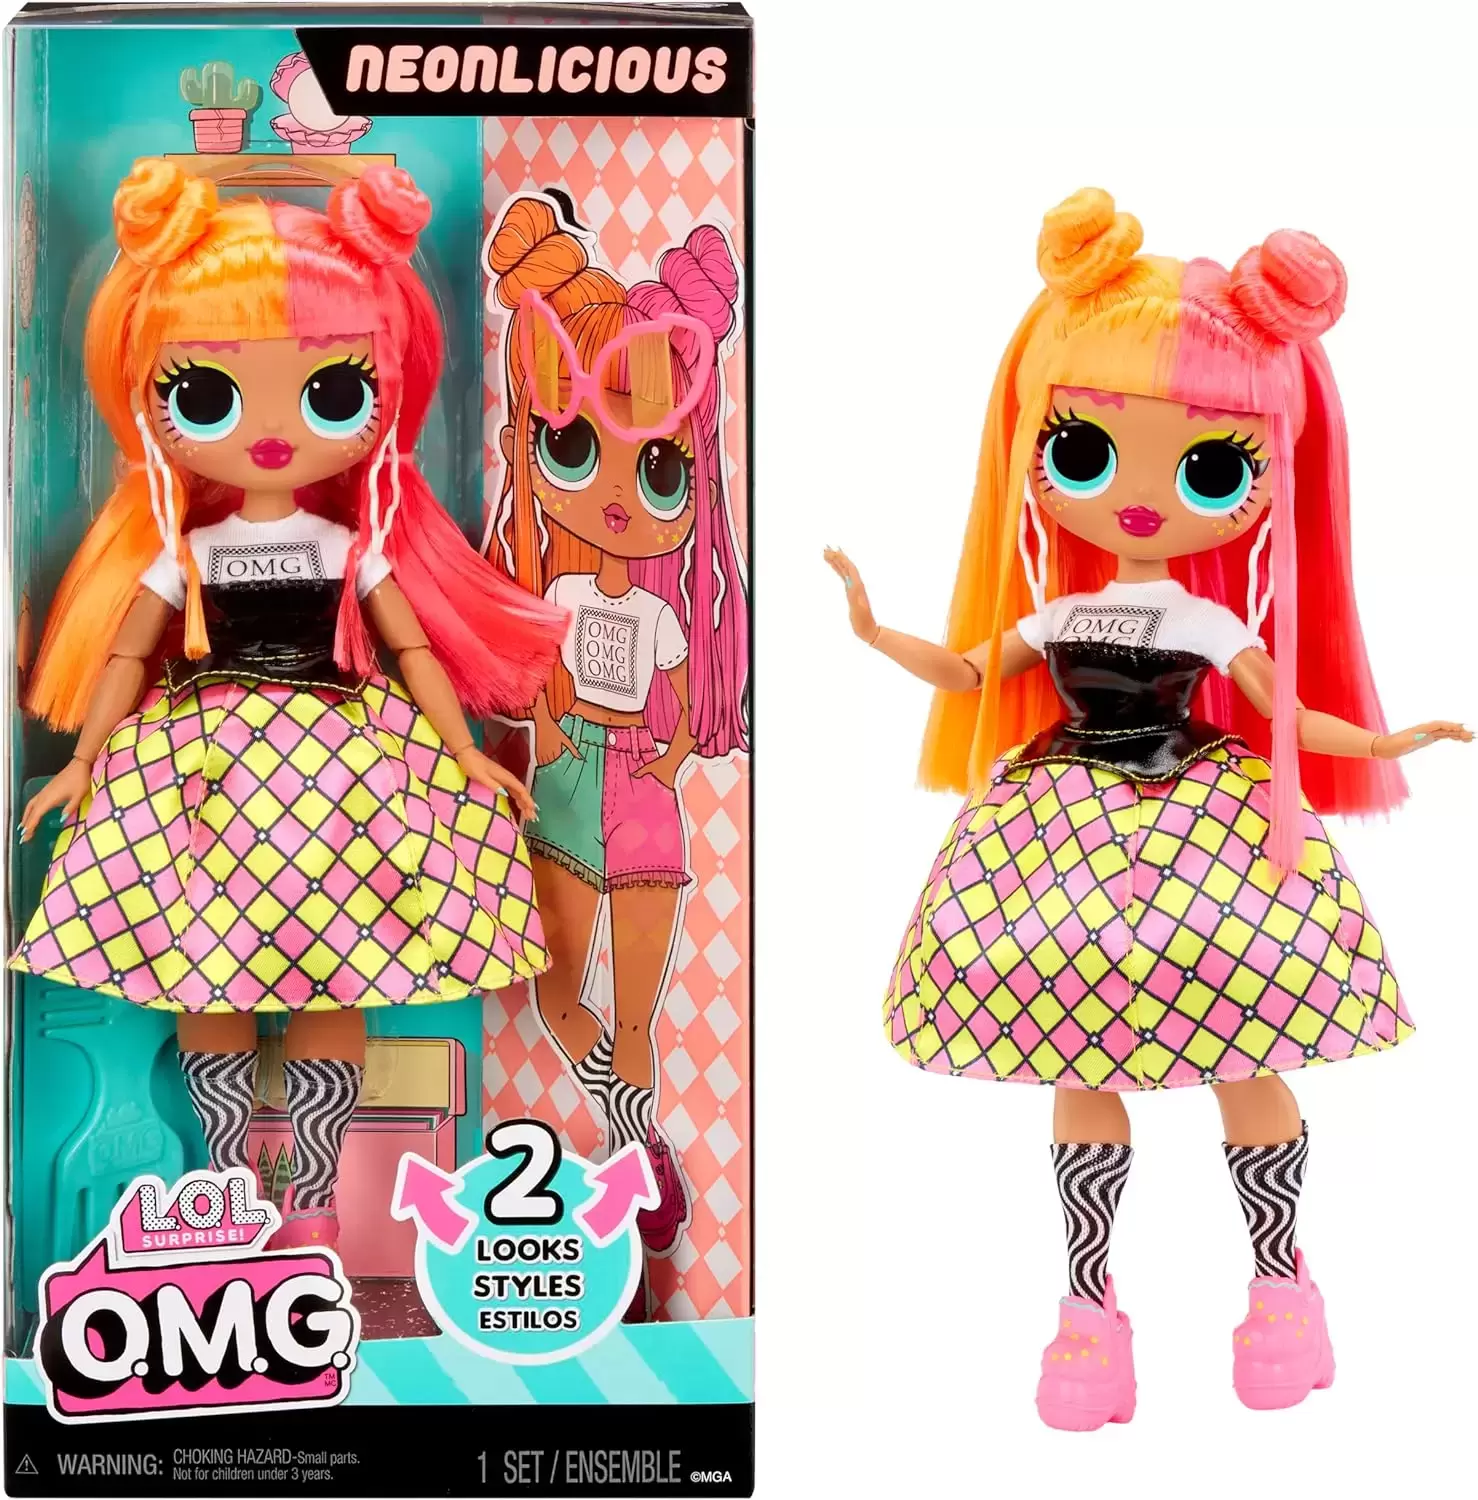 Lol Surprise! O.M.G. Candylicious Fashion Doll - Neonlicious